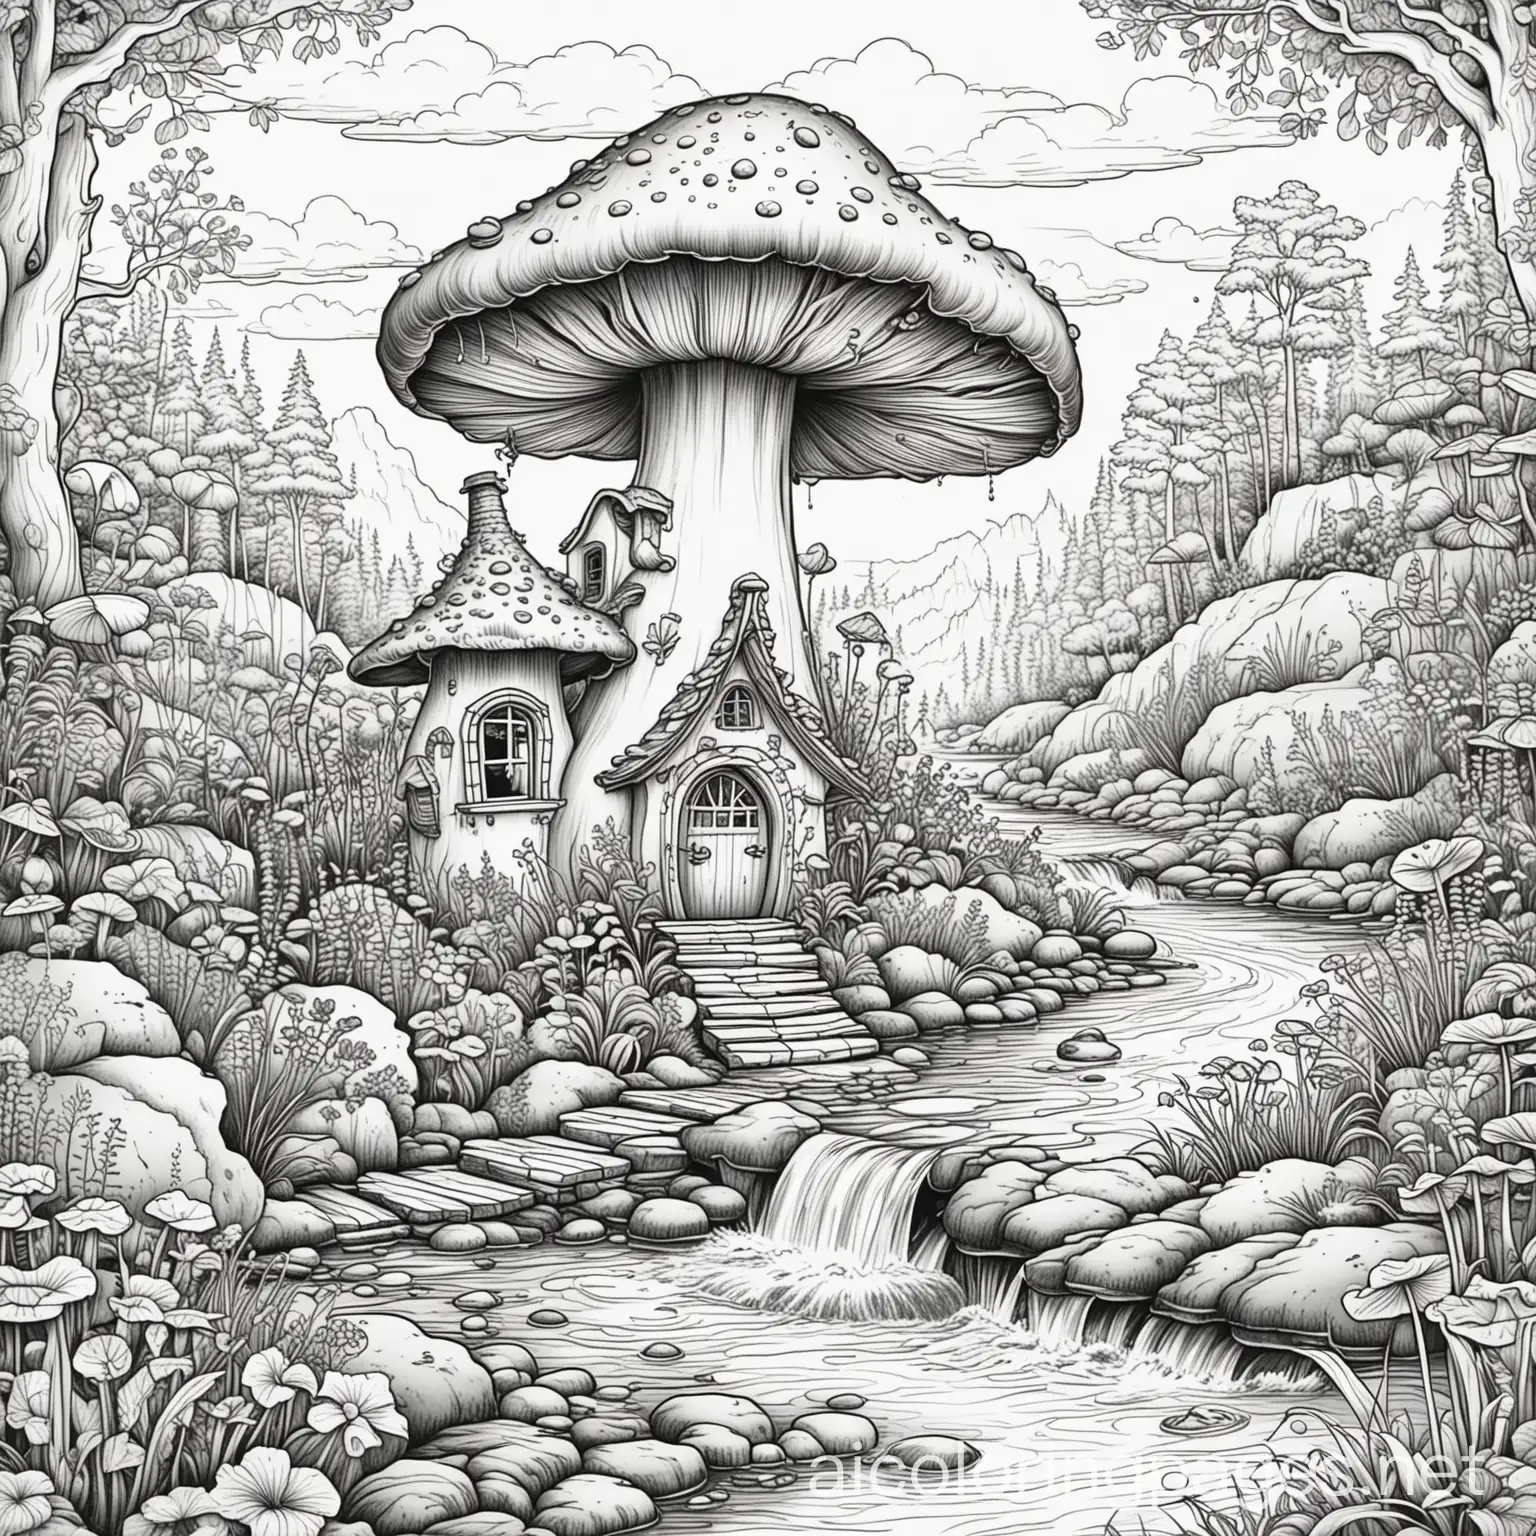 A SIMPLE COLORING BOOK PAGE OF A MUSHROOM HOUSE IN A FANTASY LANDSCAPE WITH A BROOK FLOWING BY IT, SOLID OUTLINES RENDERED IN BLACK AND WHITE., Coloring Page, black and white, line art, white background, Simplicity, Ample White Space. The background of the coloring page is plain white to make it easy for young children to color within the lines. The outlines of all the subjects are easy to distinguish, making it simple for kids to color without too much difficulty